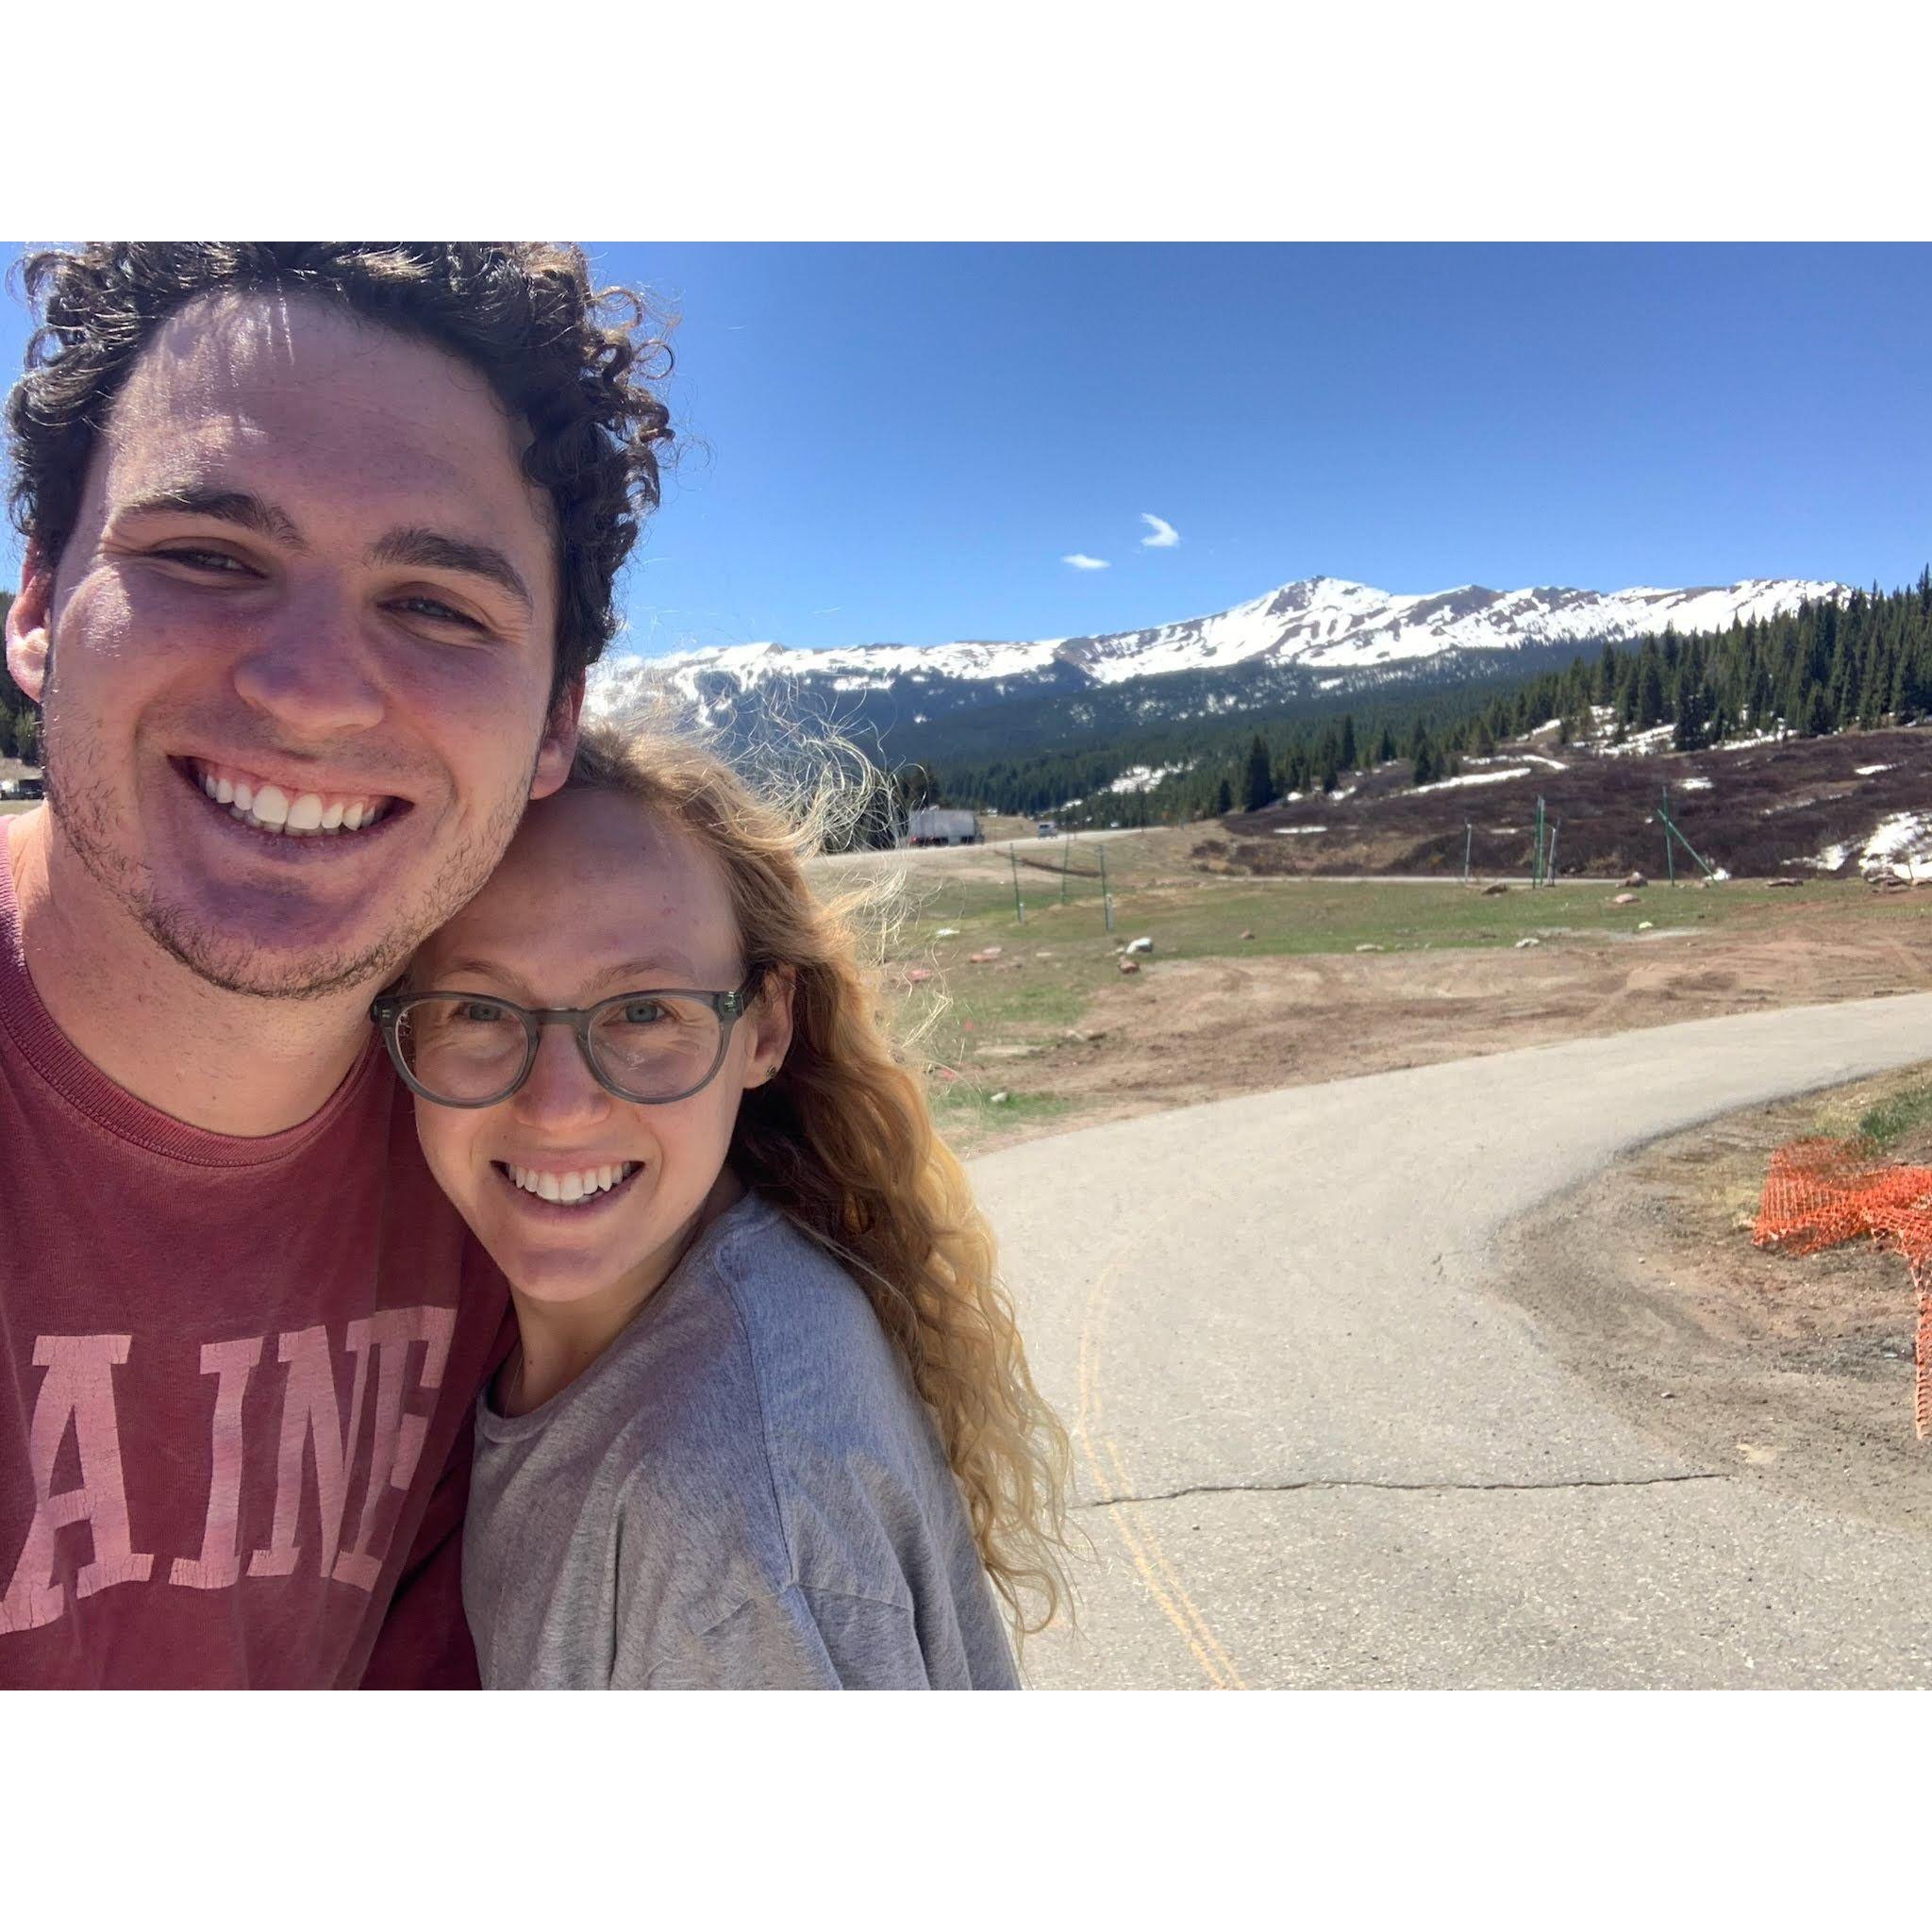 Enjoying our roadtrip around Colorado and Utah, we stopped to take some pictures on the road!